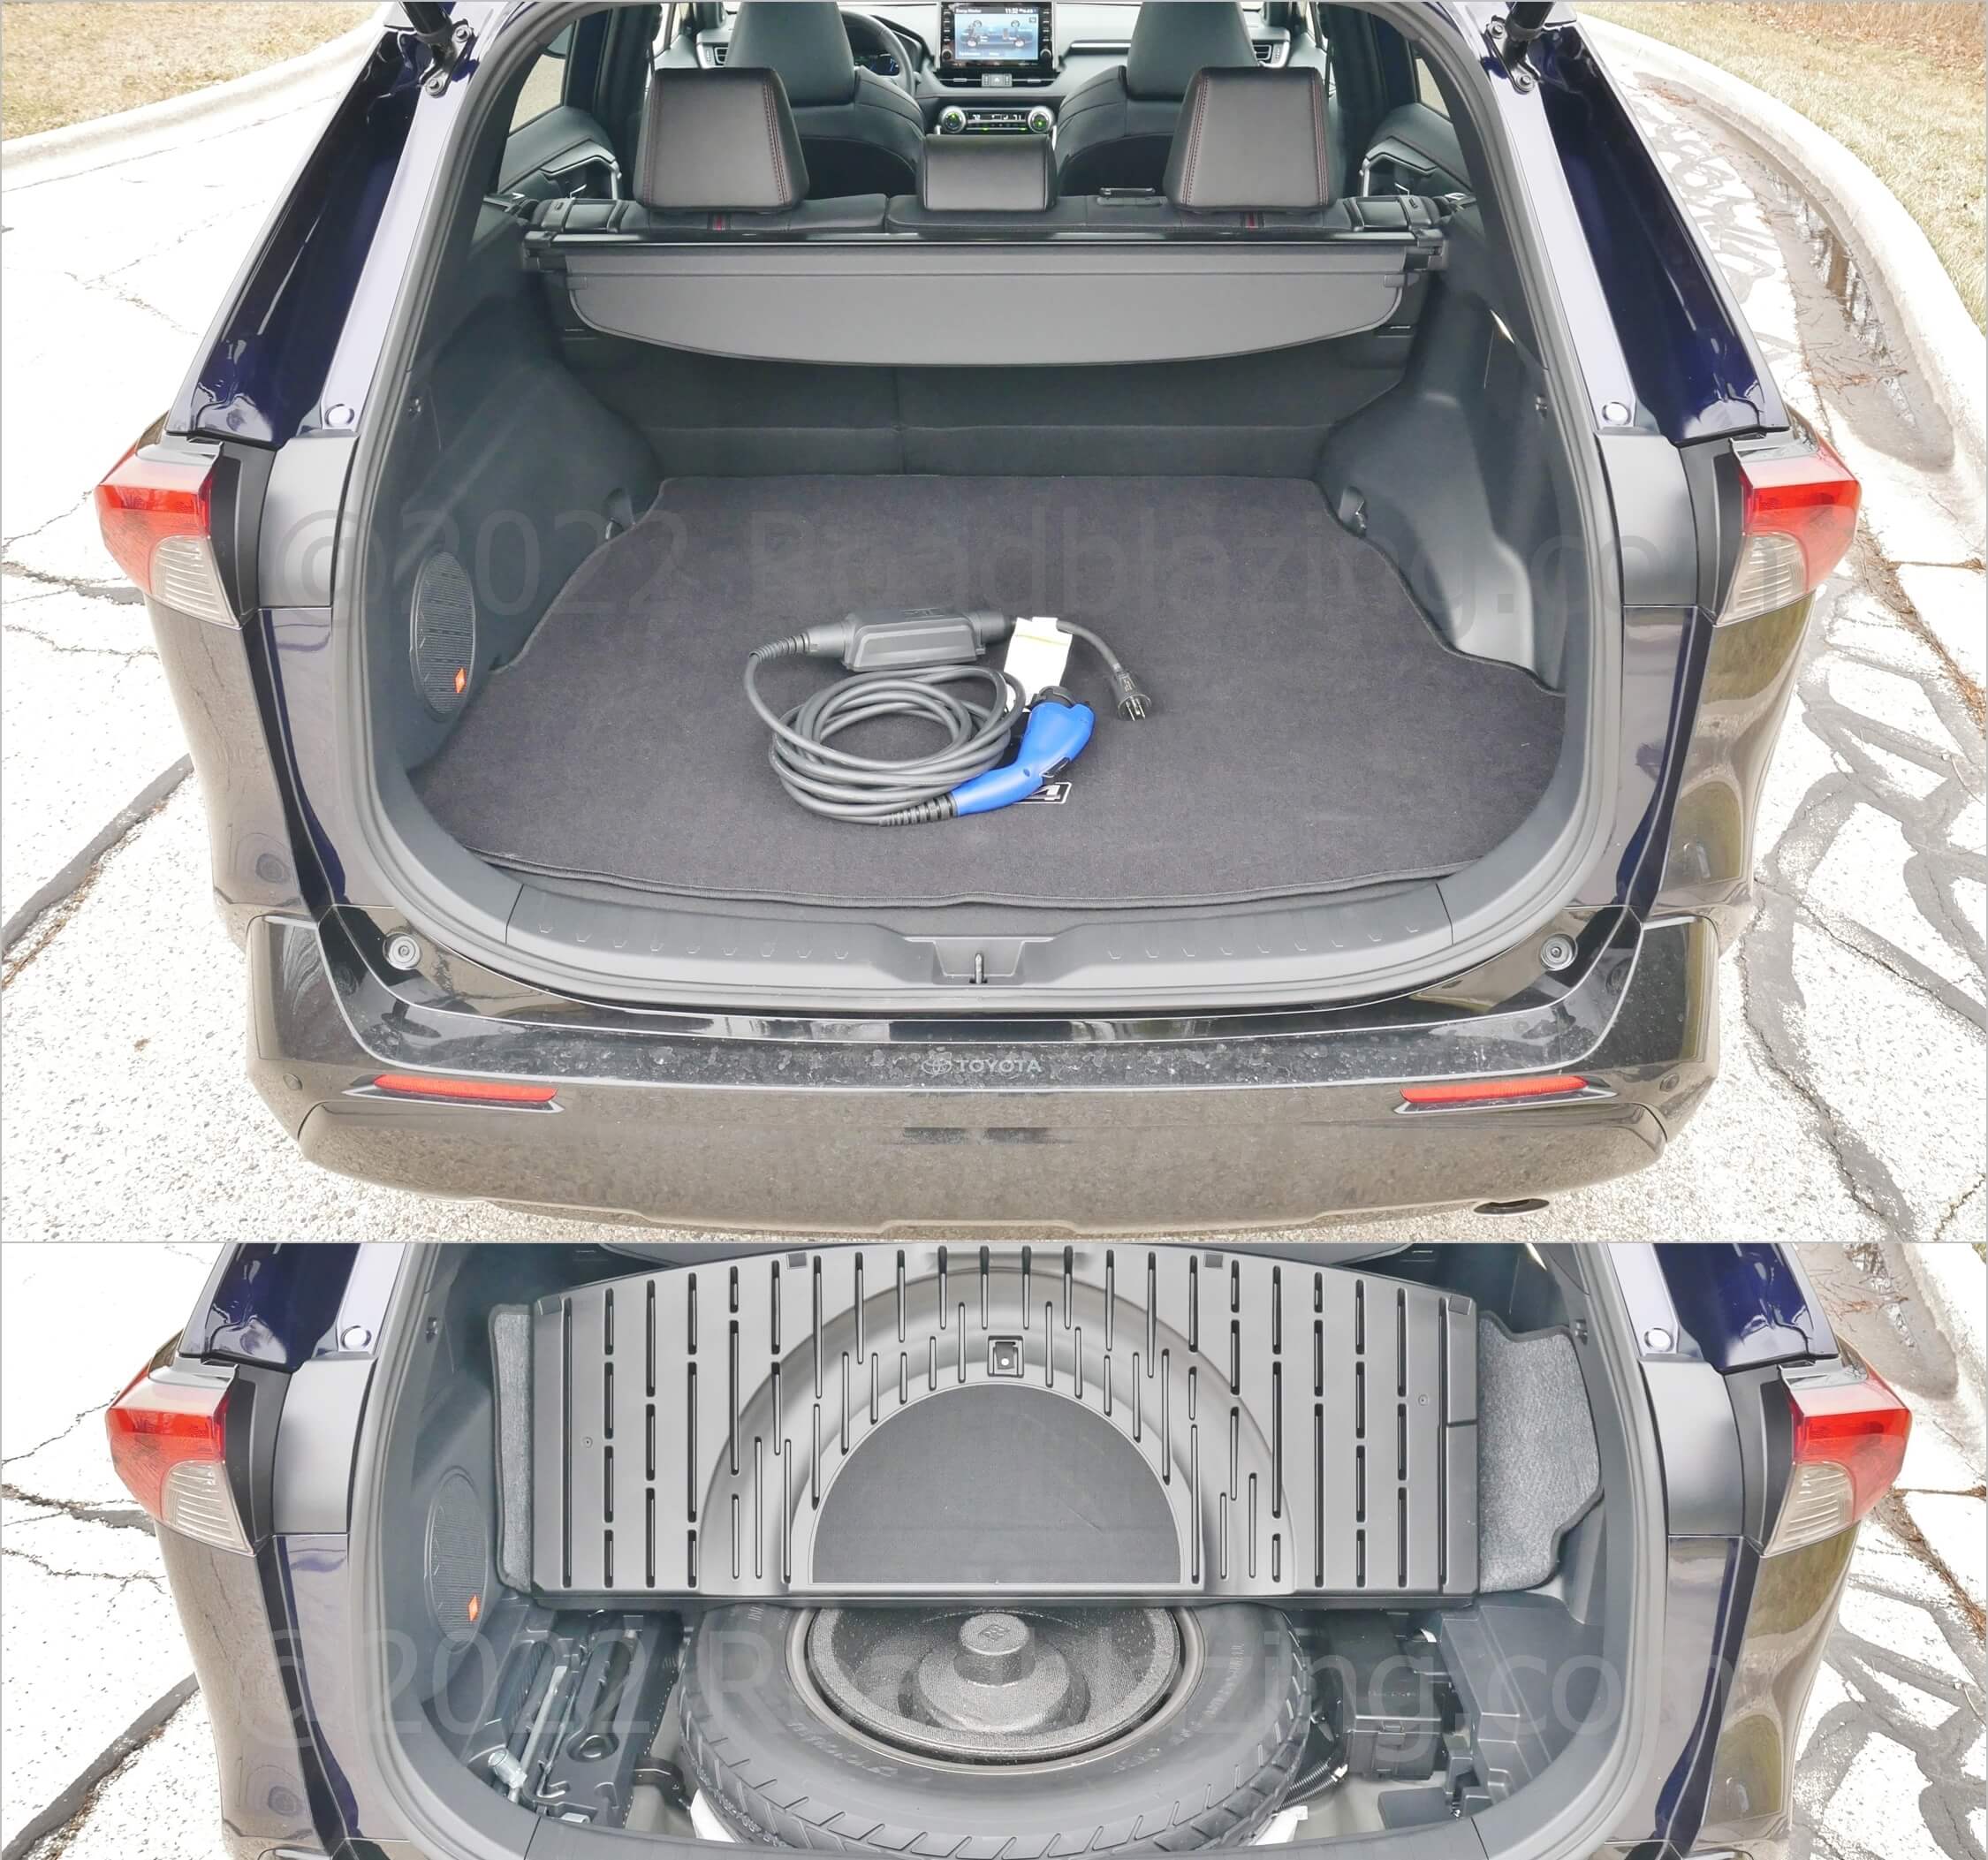 2022 Toyota RAV4 Prime XLE AWD PHEV: sub cargo floor storage for donut spare tire doesn't fit AC Wall outlet charging cable